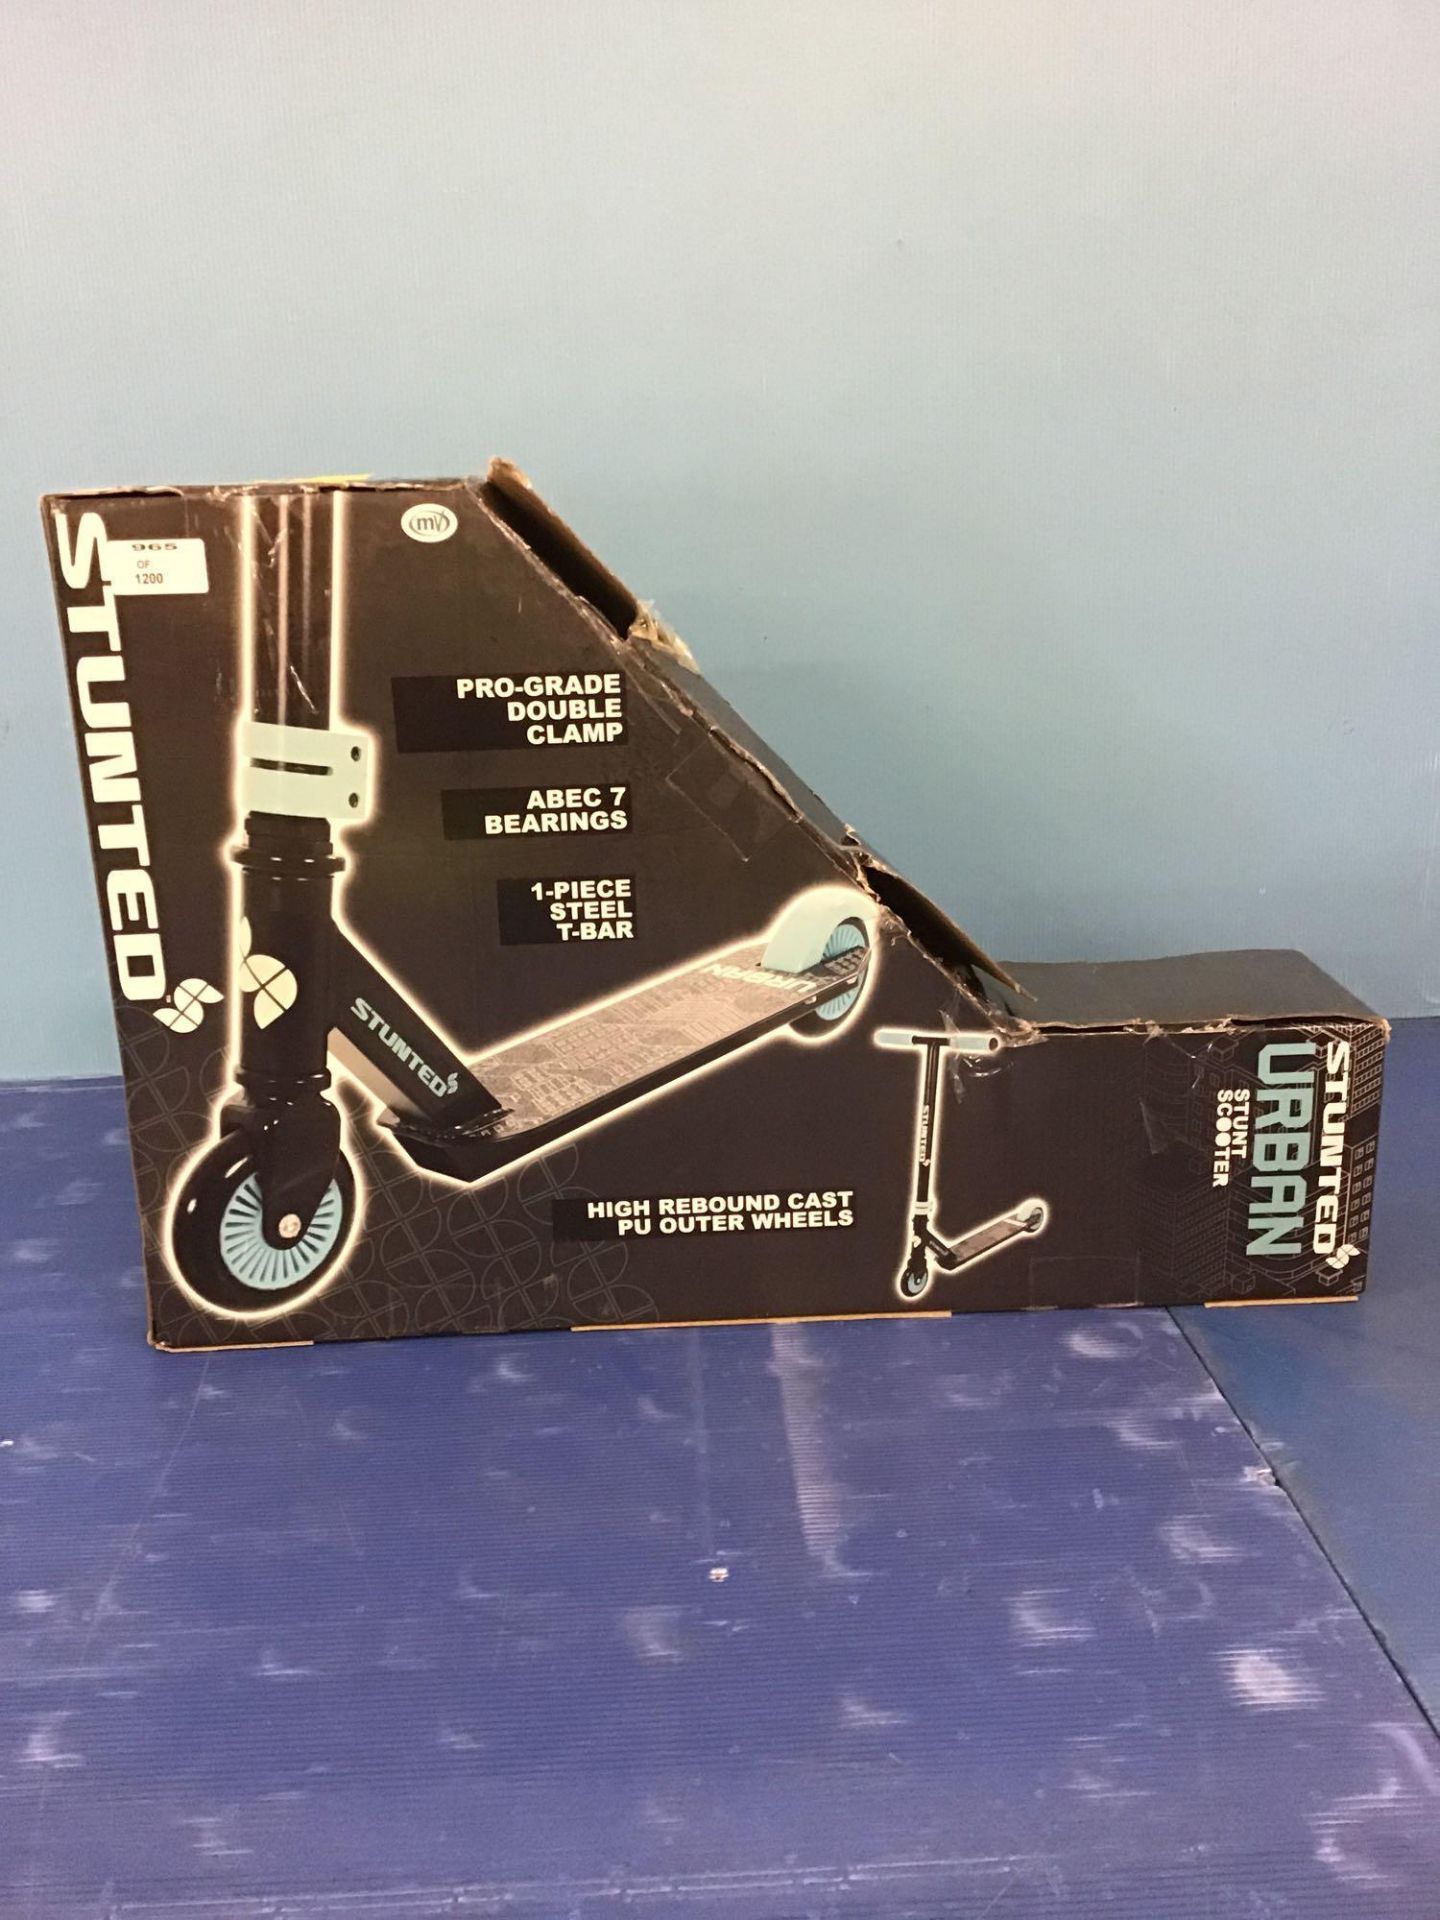 Stunted Urban Stunt Scooter, £29.99 RRP - Image 2 of 5